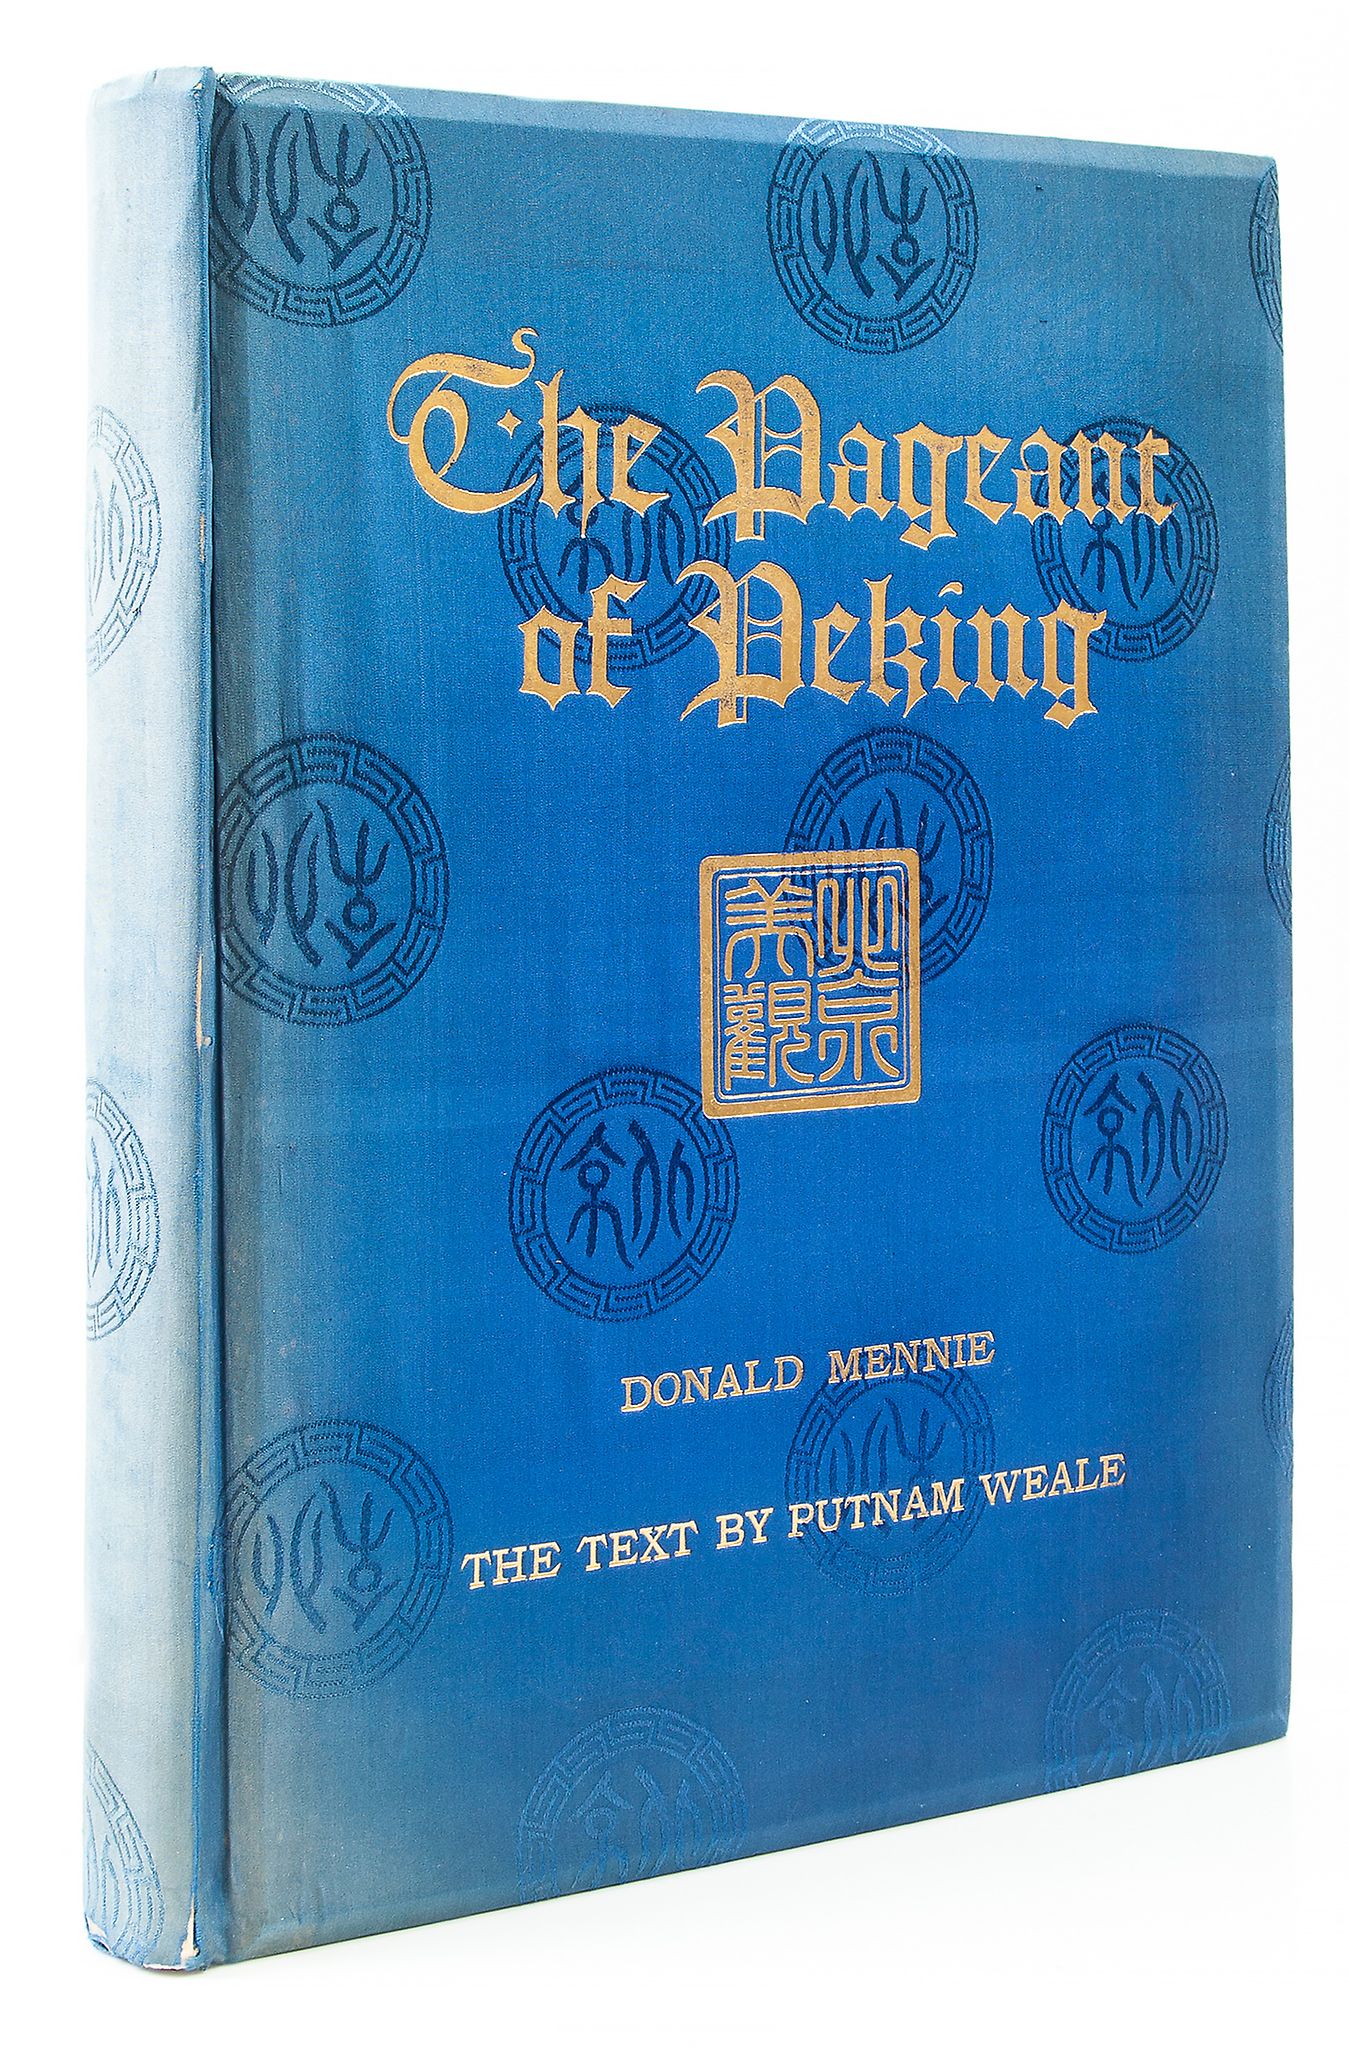 Mennie (Donald) - The Pageant of Peking,   third edition, mounted Vandyk photogravure plates, some